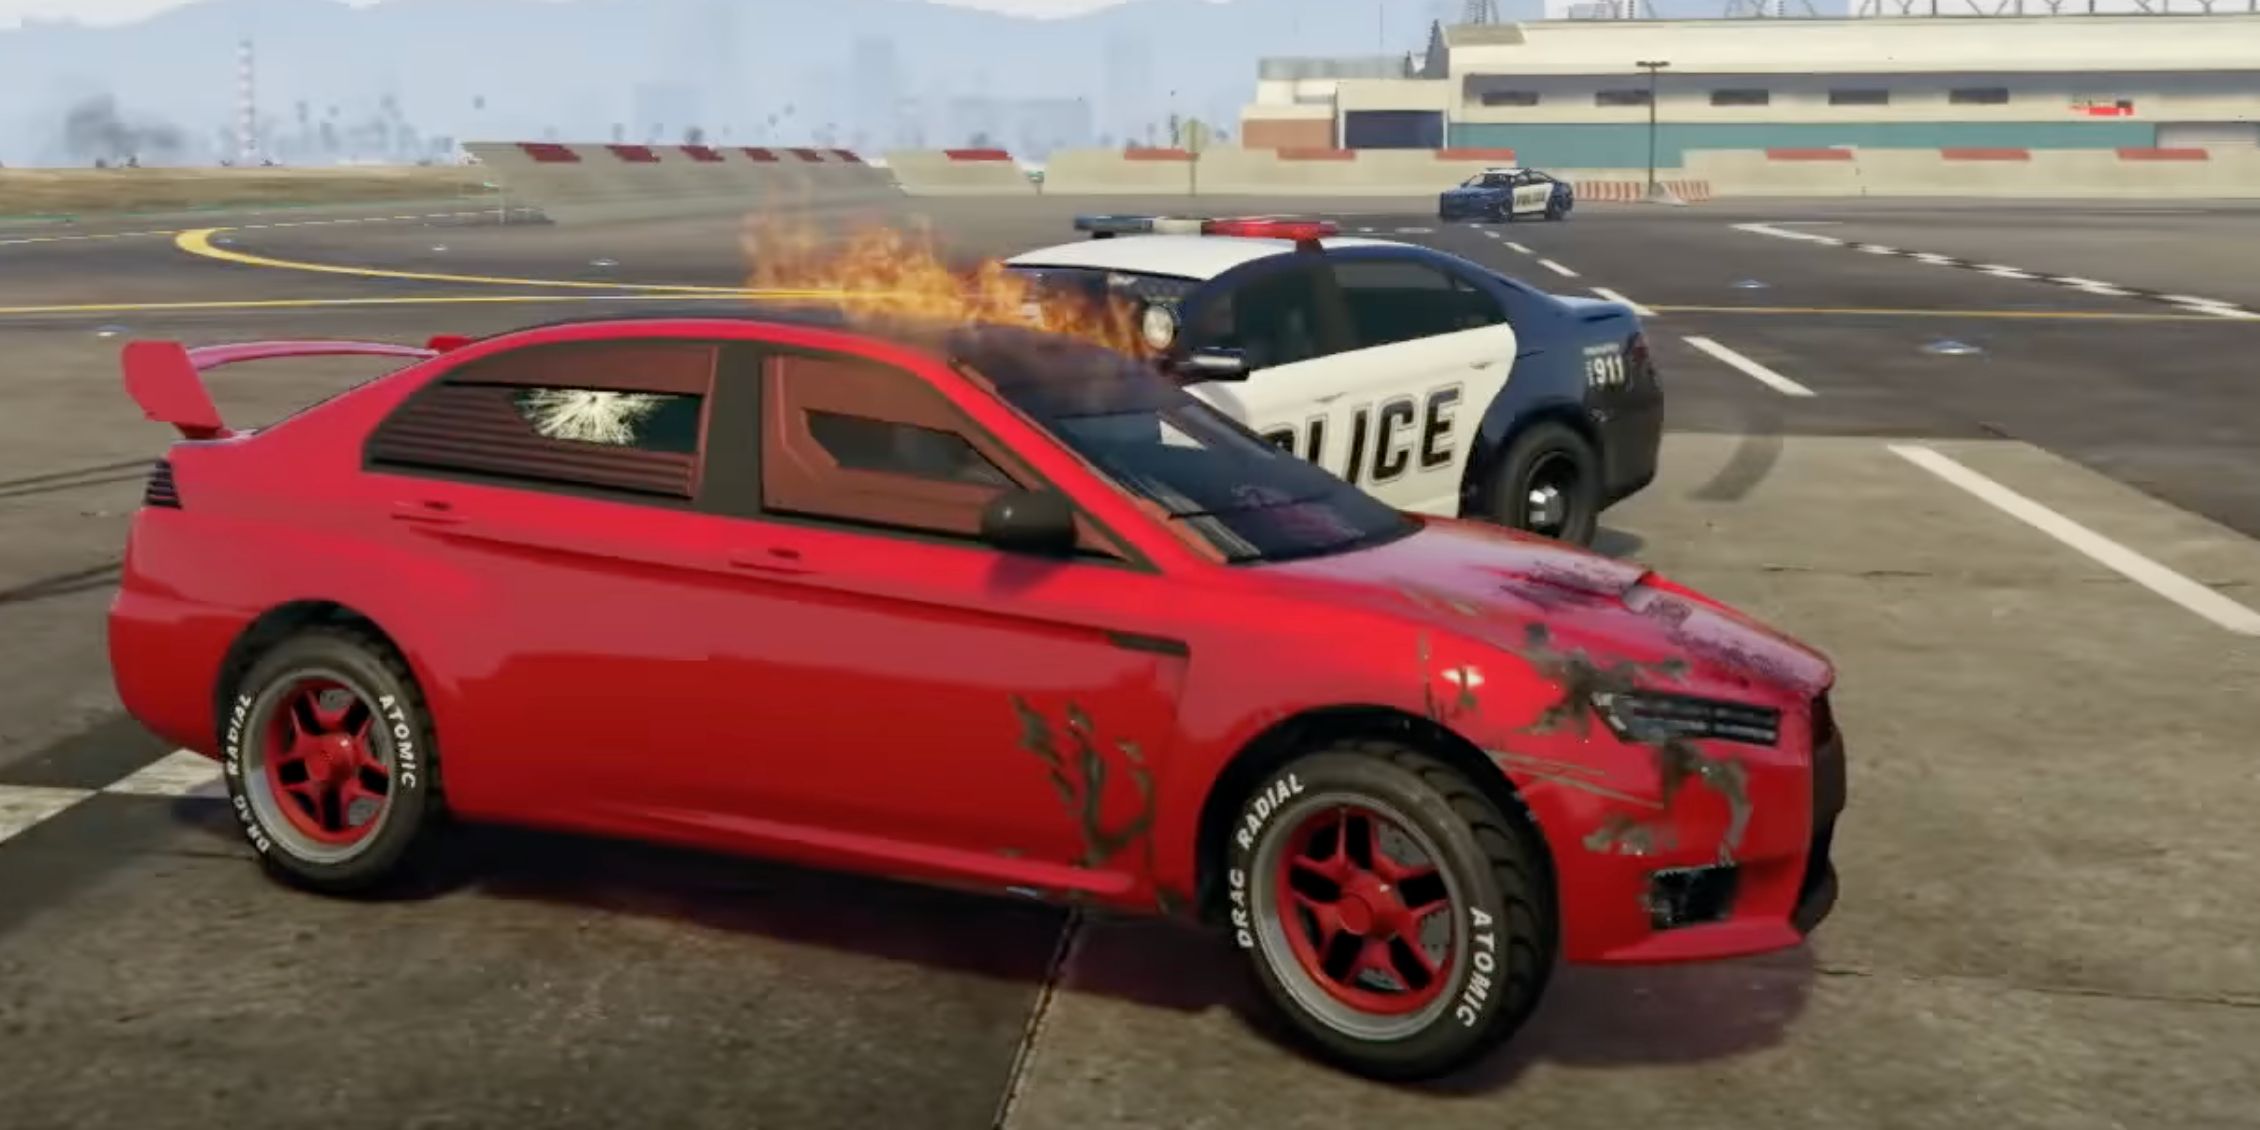 A car in GTA Online that has been smashed up and ruined by police